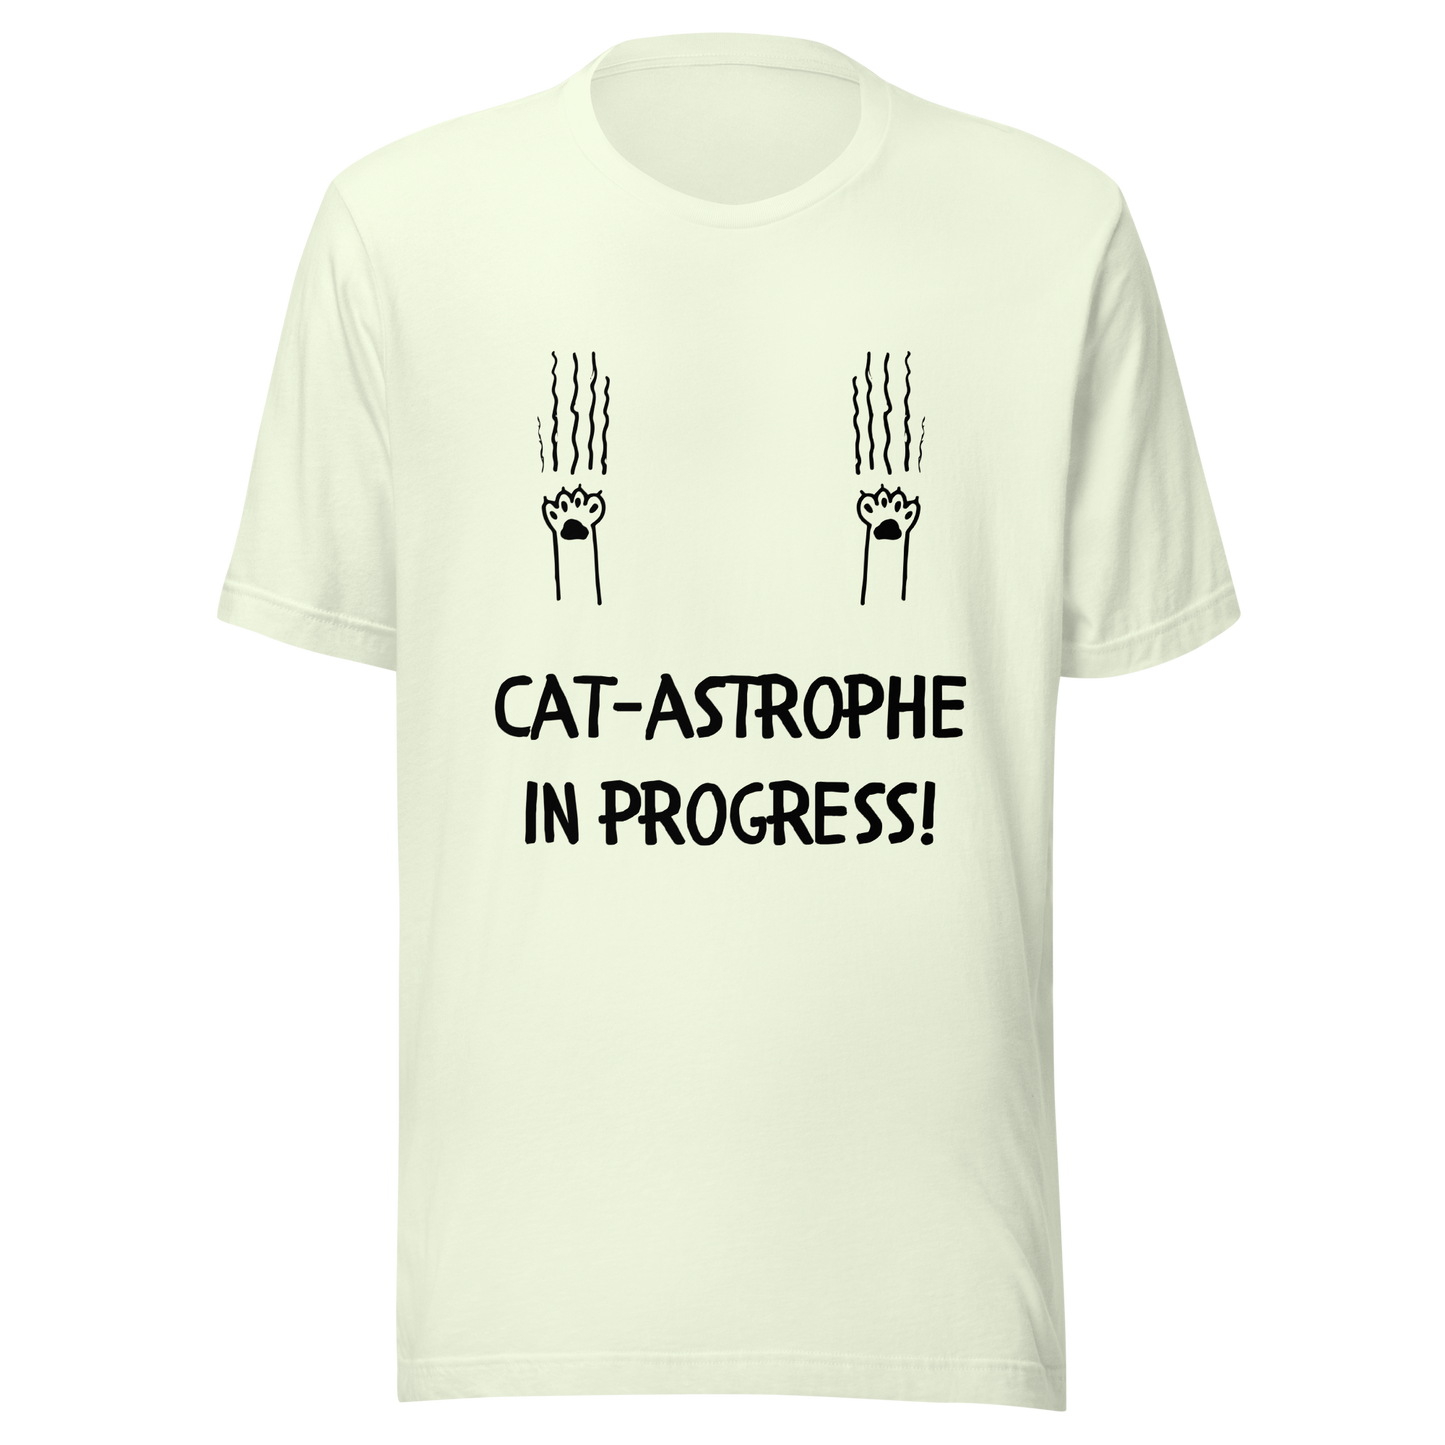 Unisex T-shirt - Stay Calm and Embrace the Paw-some Chaos with Our 'Cat-astrophe in Progress!'